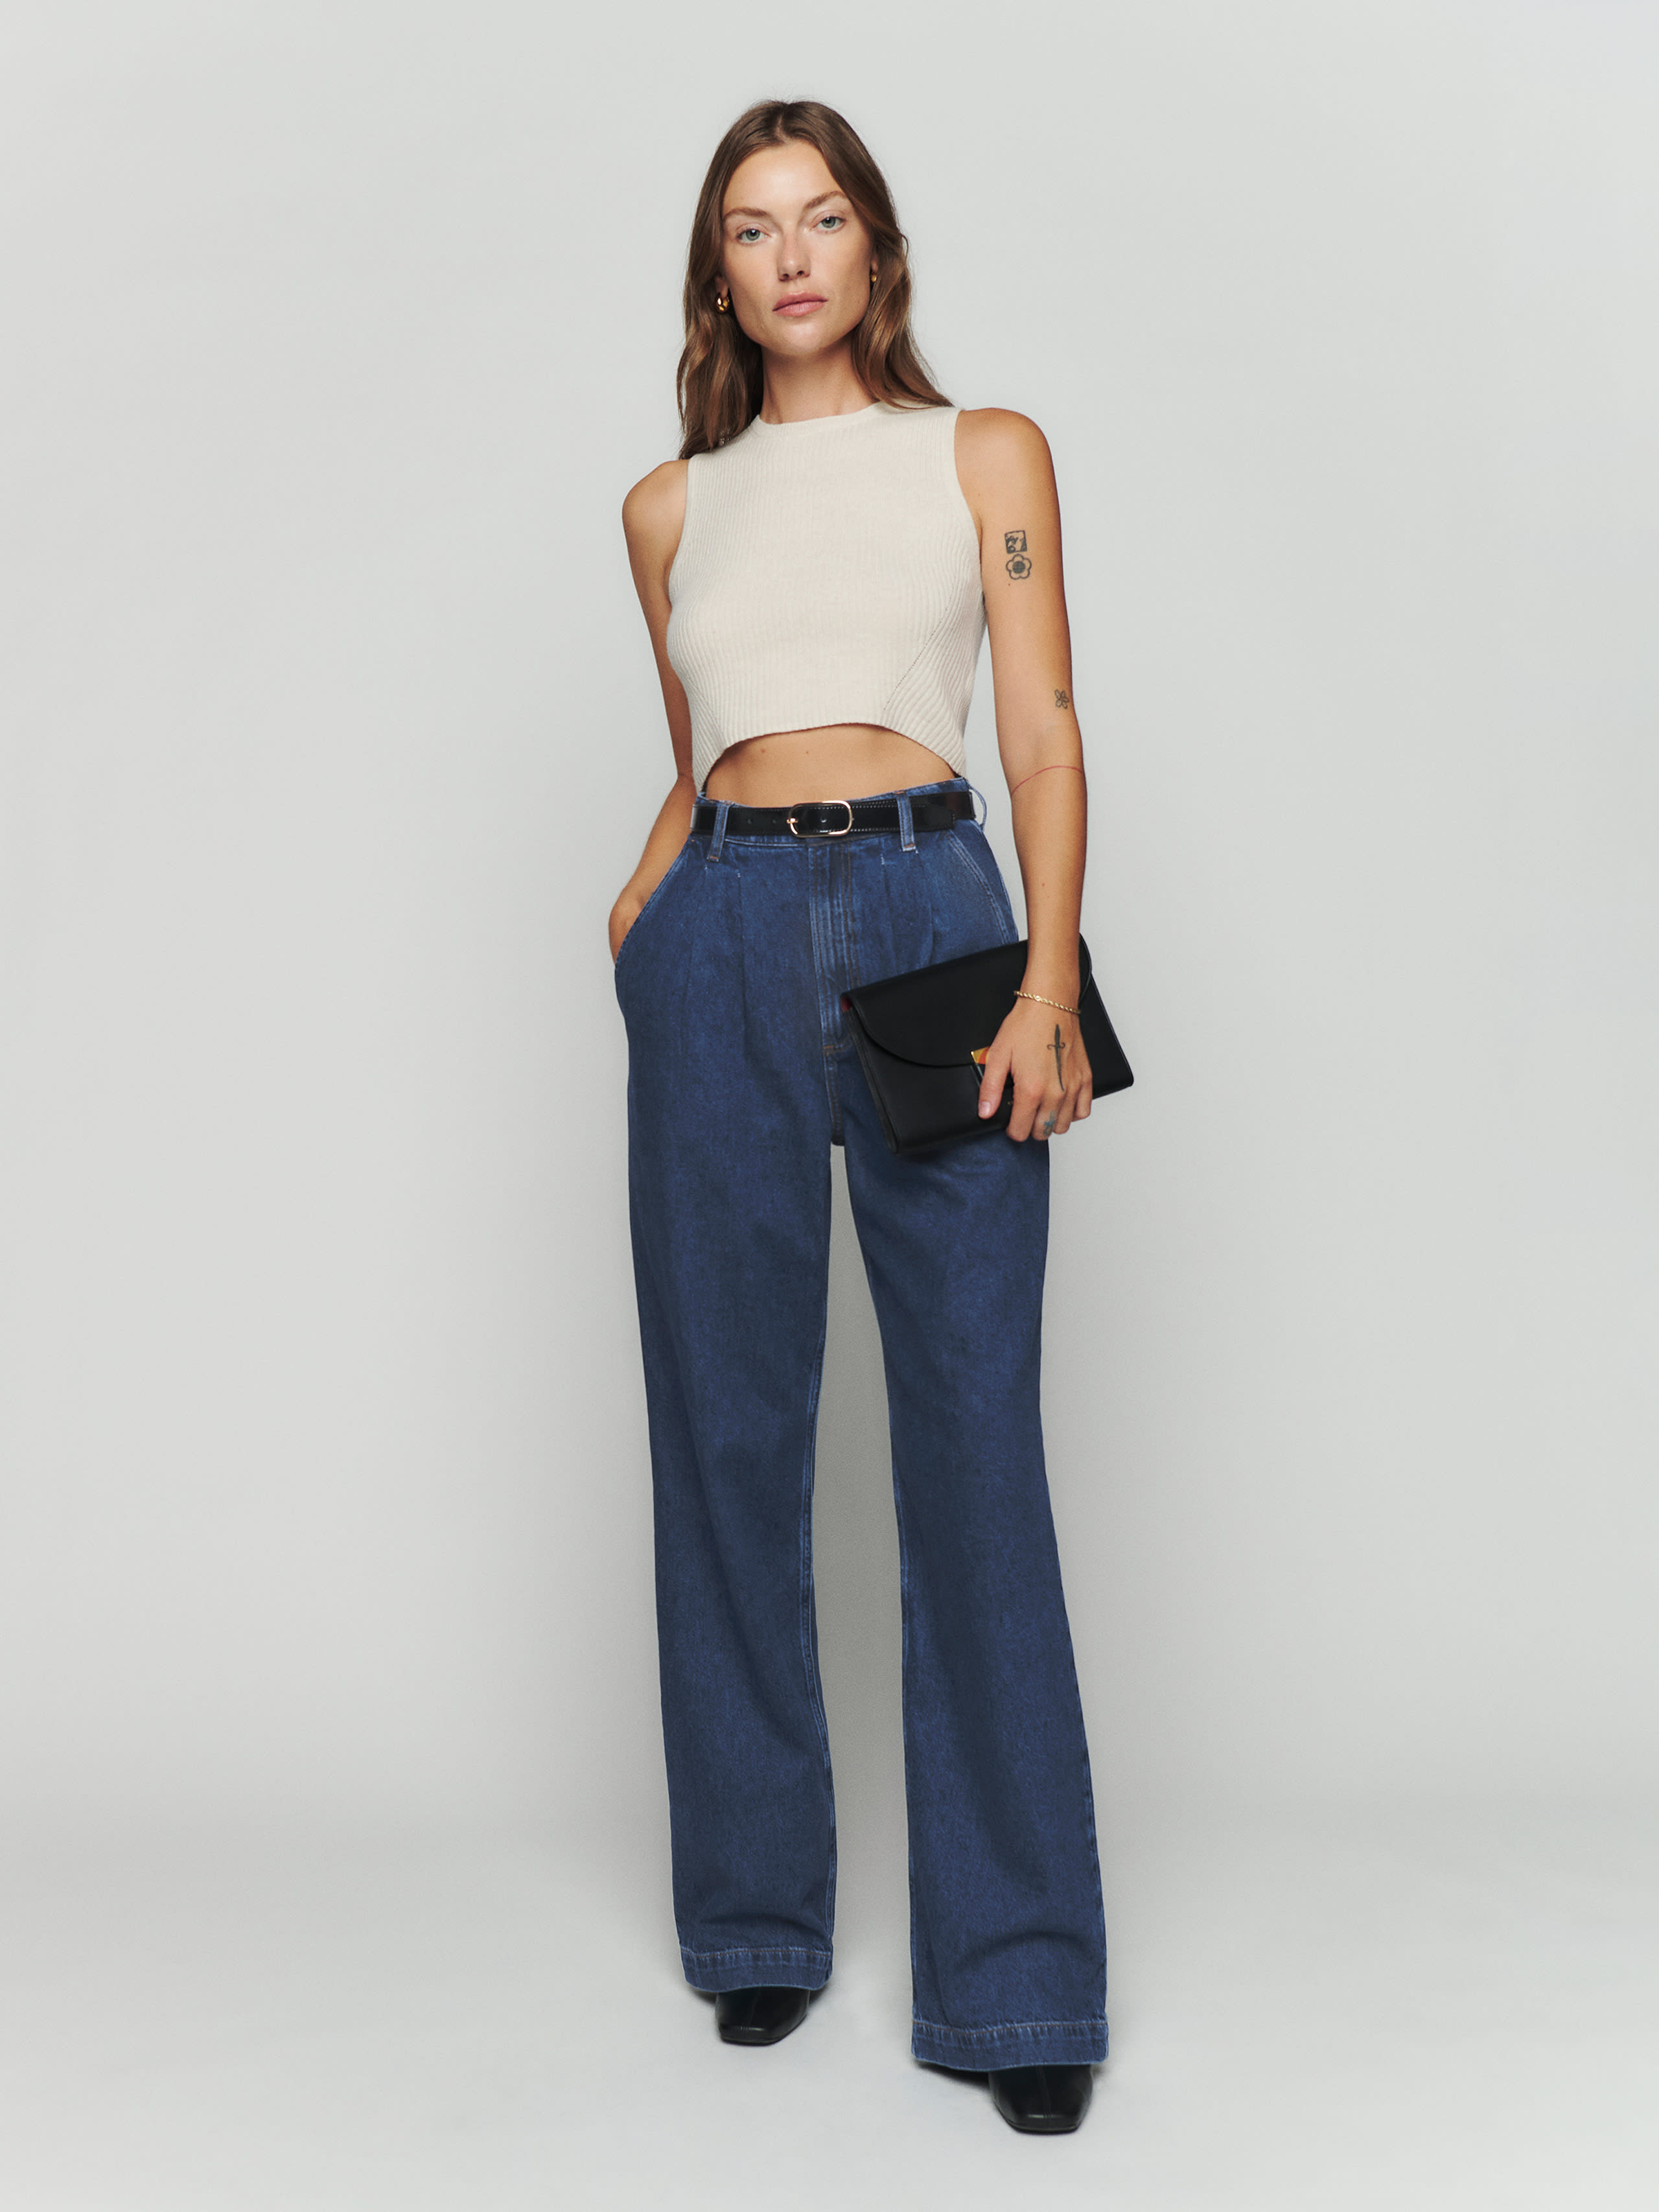 Montauk Pleated High Rise Jeans, image 1